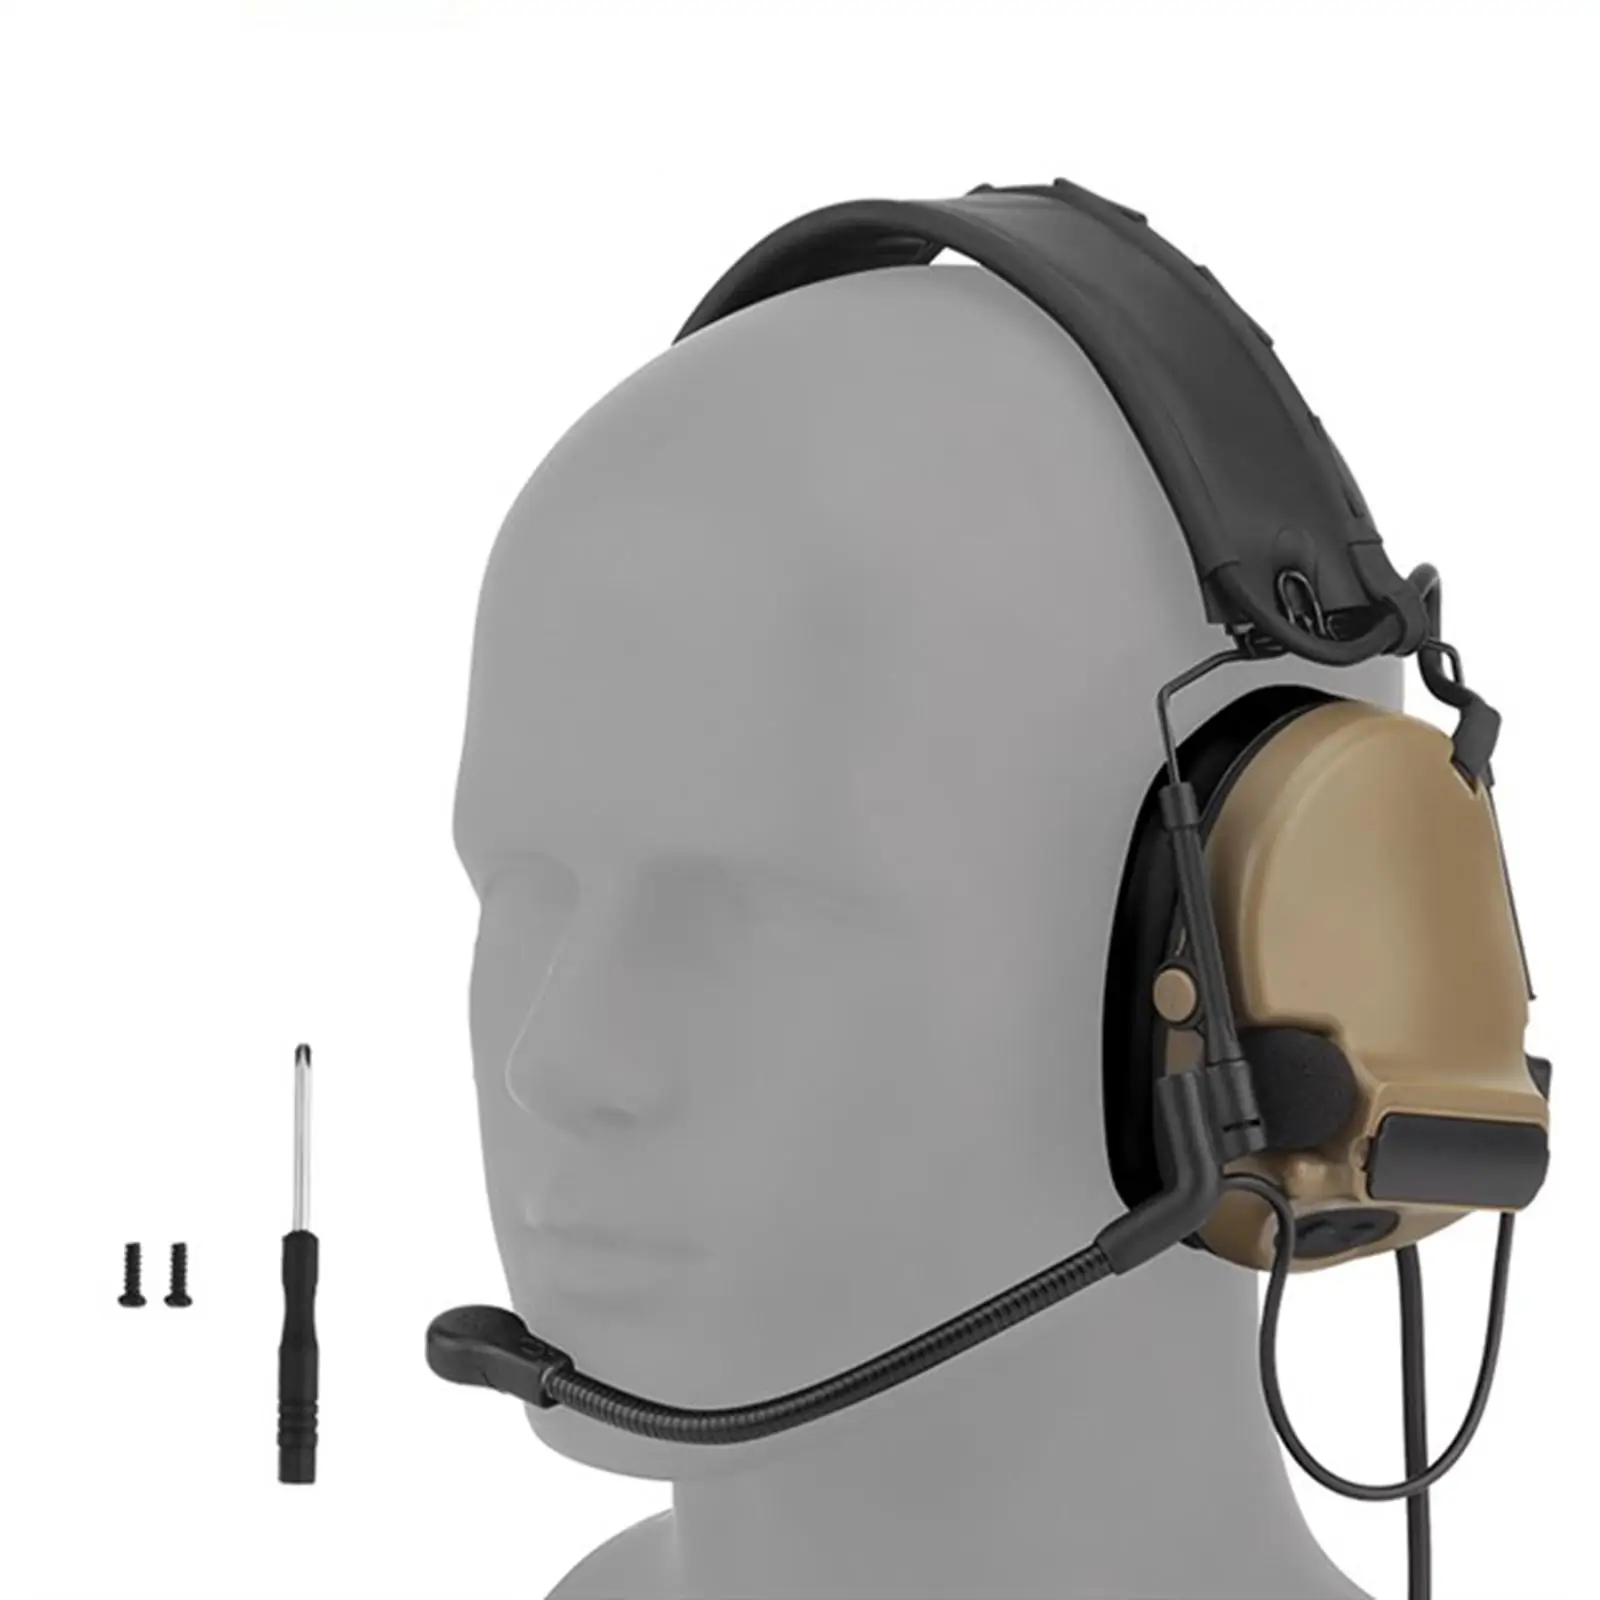 Hearing Ear Protection Soundproof Earmuffs Lightweight Soft Protective Earmuffs for Construction Mowing Learning Sleeping Gaming